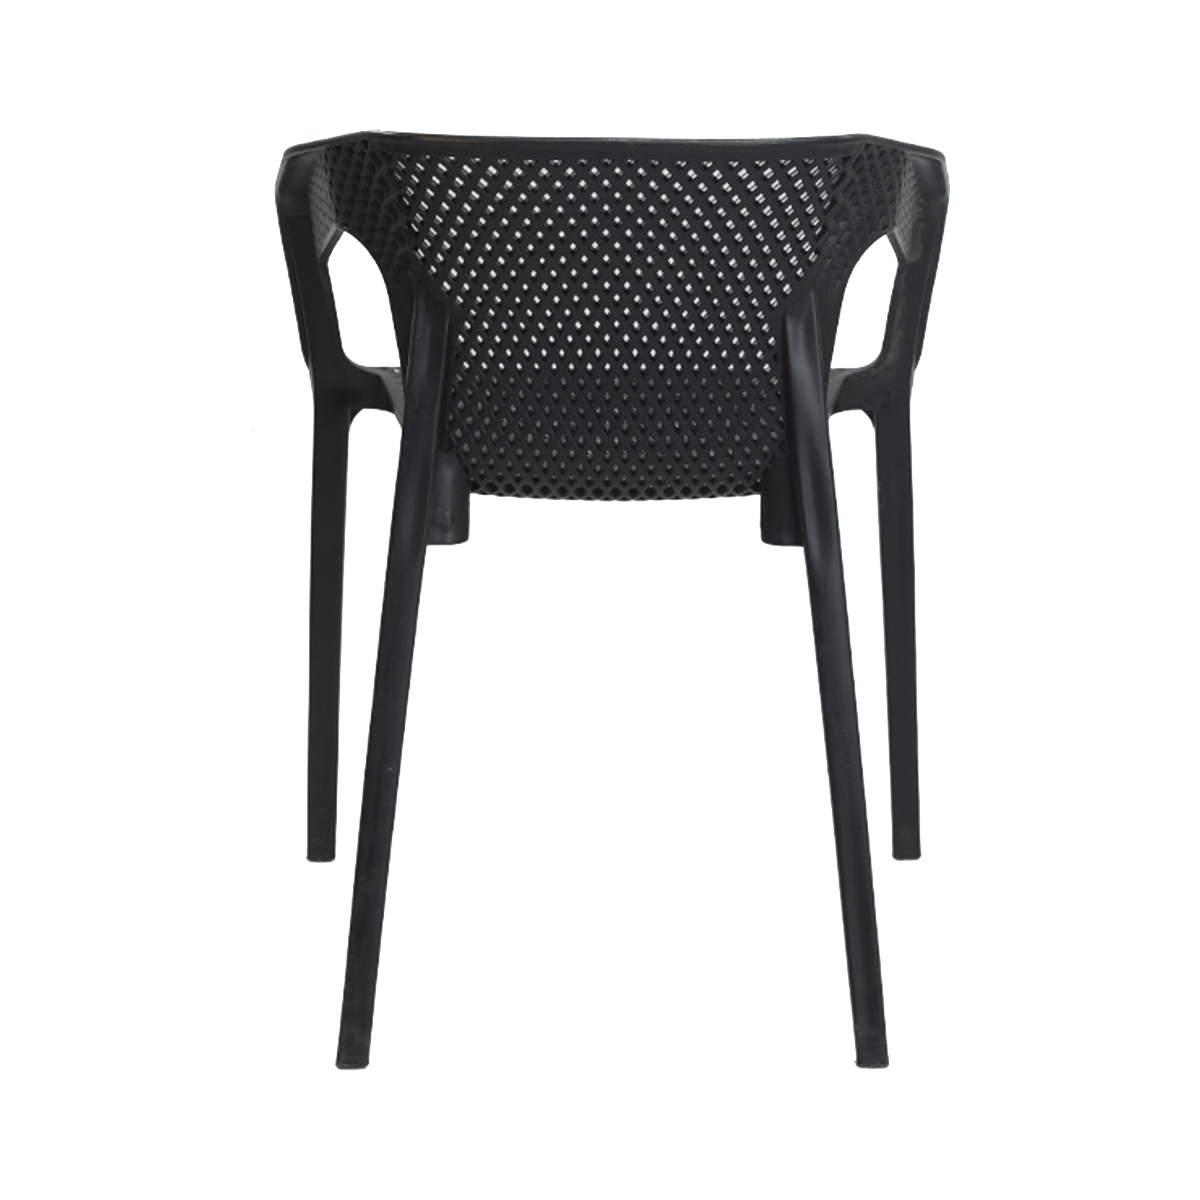 Furniture :: Plastic Furniture :: Plastic Chair :: Stylee Cafe Arm Chair -  Black